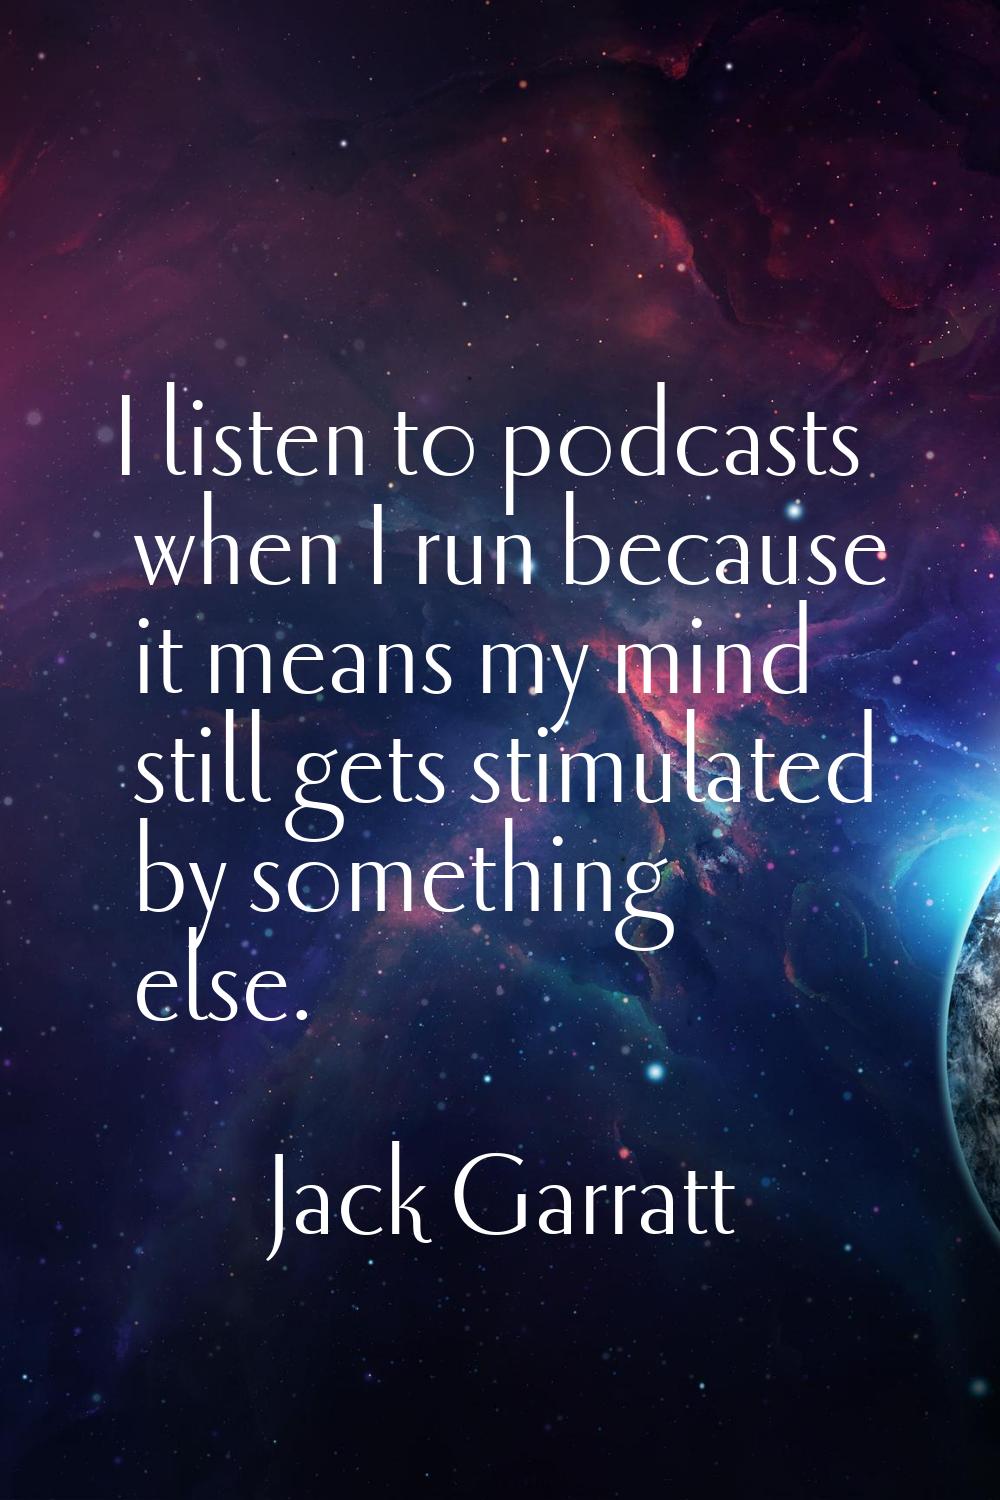 I listen to podcasts when I run because it means my mind still gets stimulated by something else.